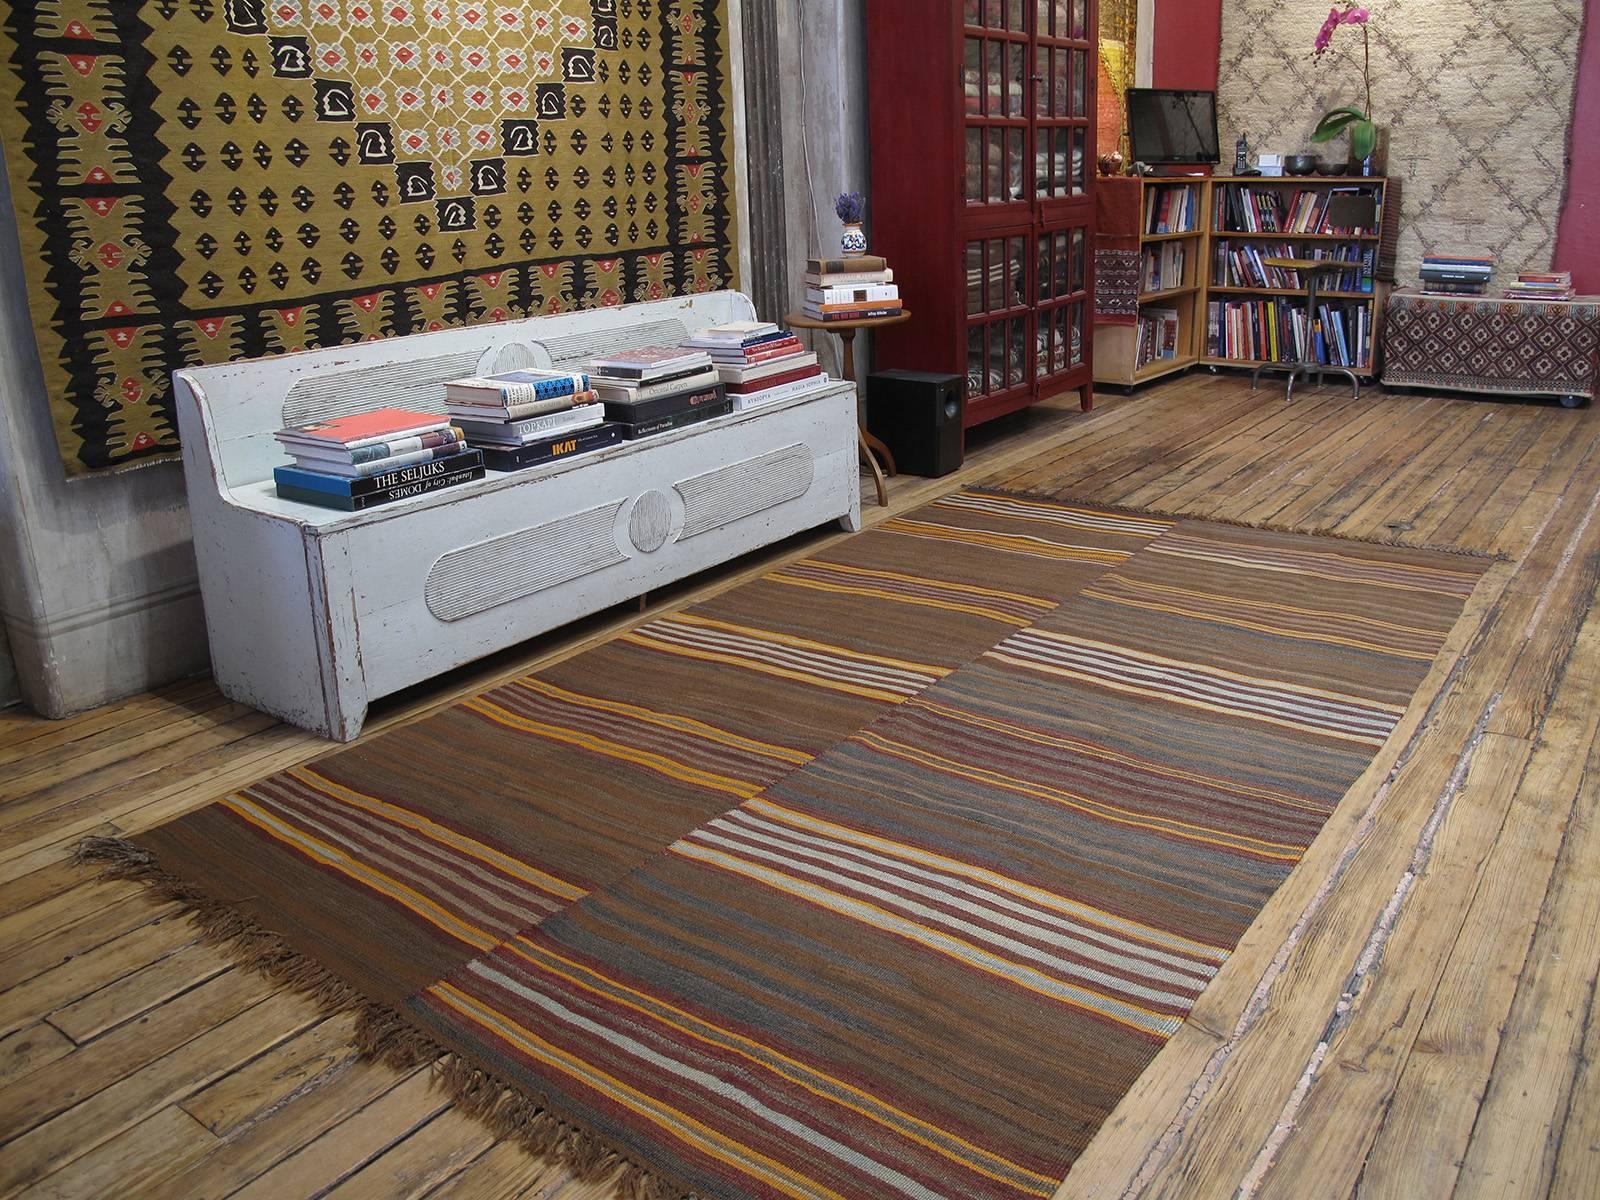 Urfa Kilim rug. A very nice old flat-weave rug from Southeastern Turkey, woven as a pair of runners on a narrow loom - they can easily be separated and used as runners. Groups of stripes on a background of natural brown wool with rich tonal